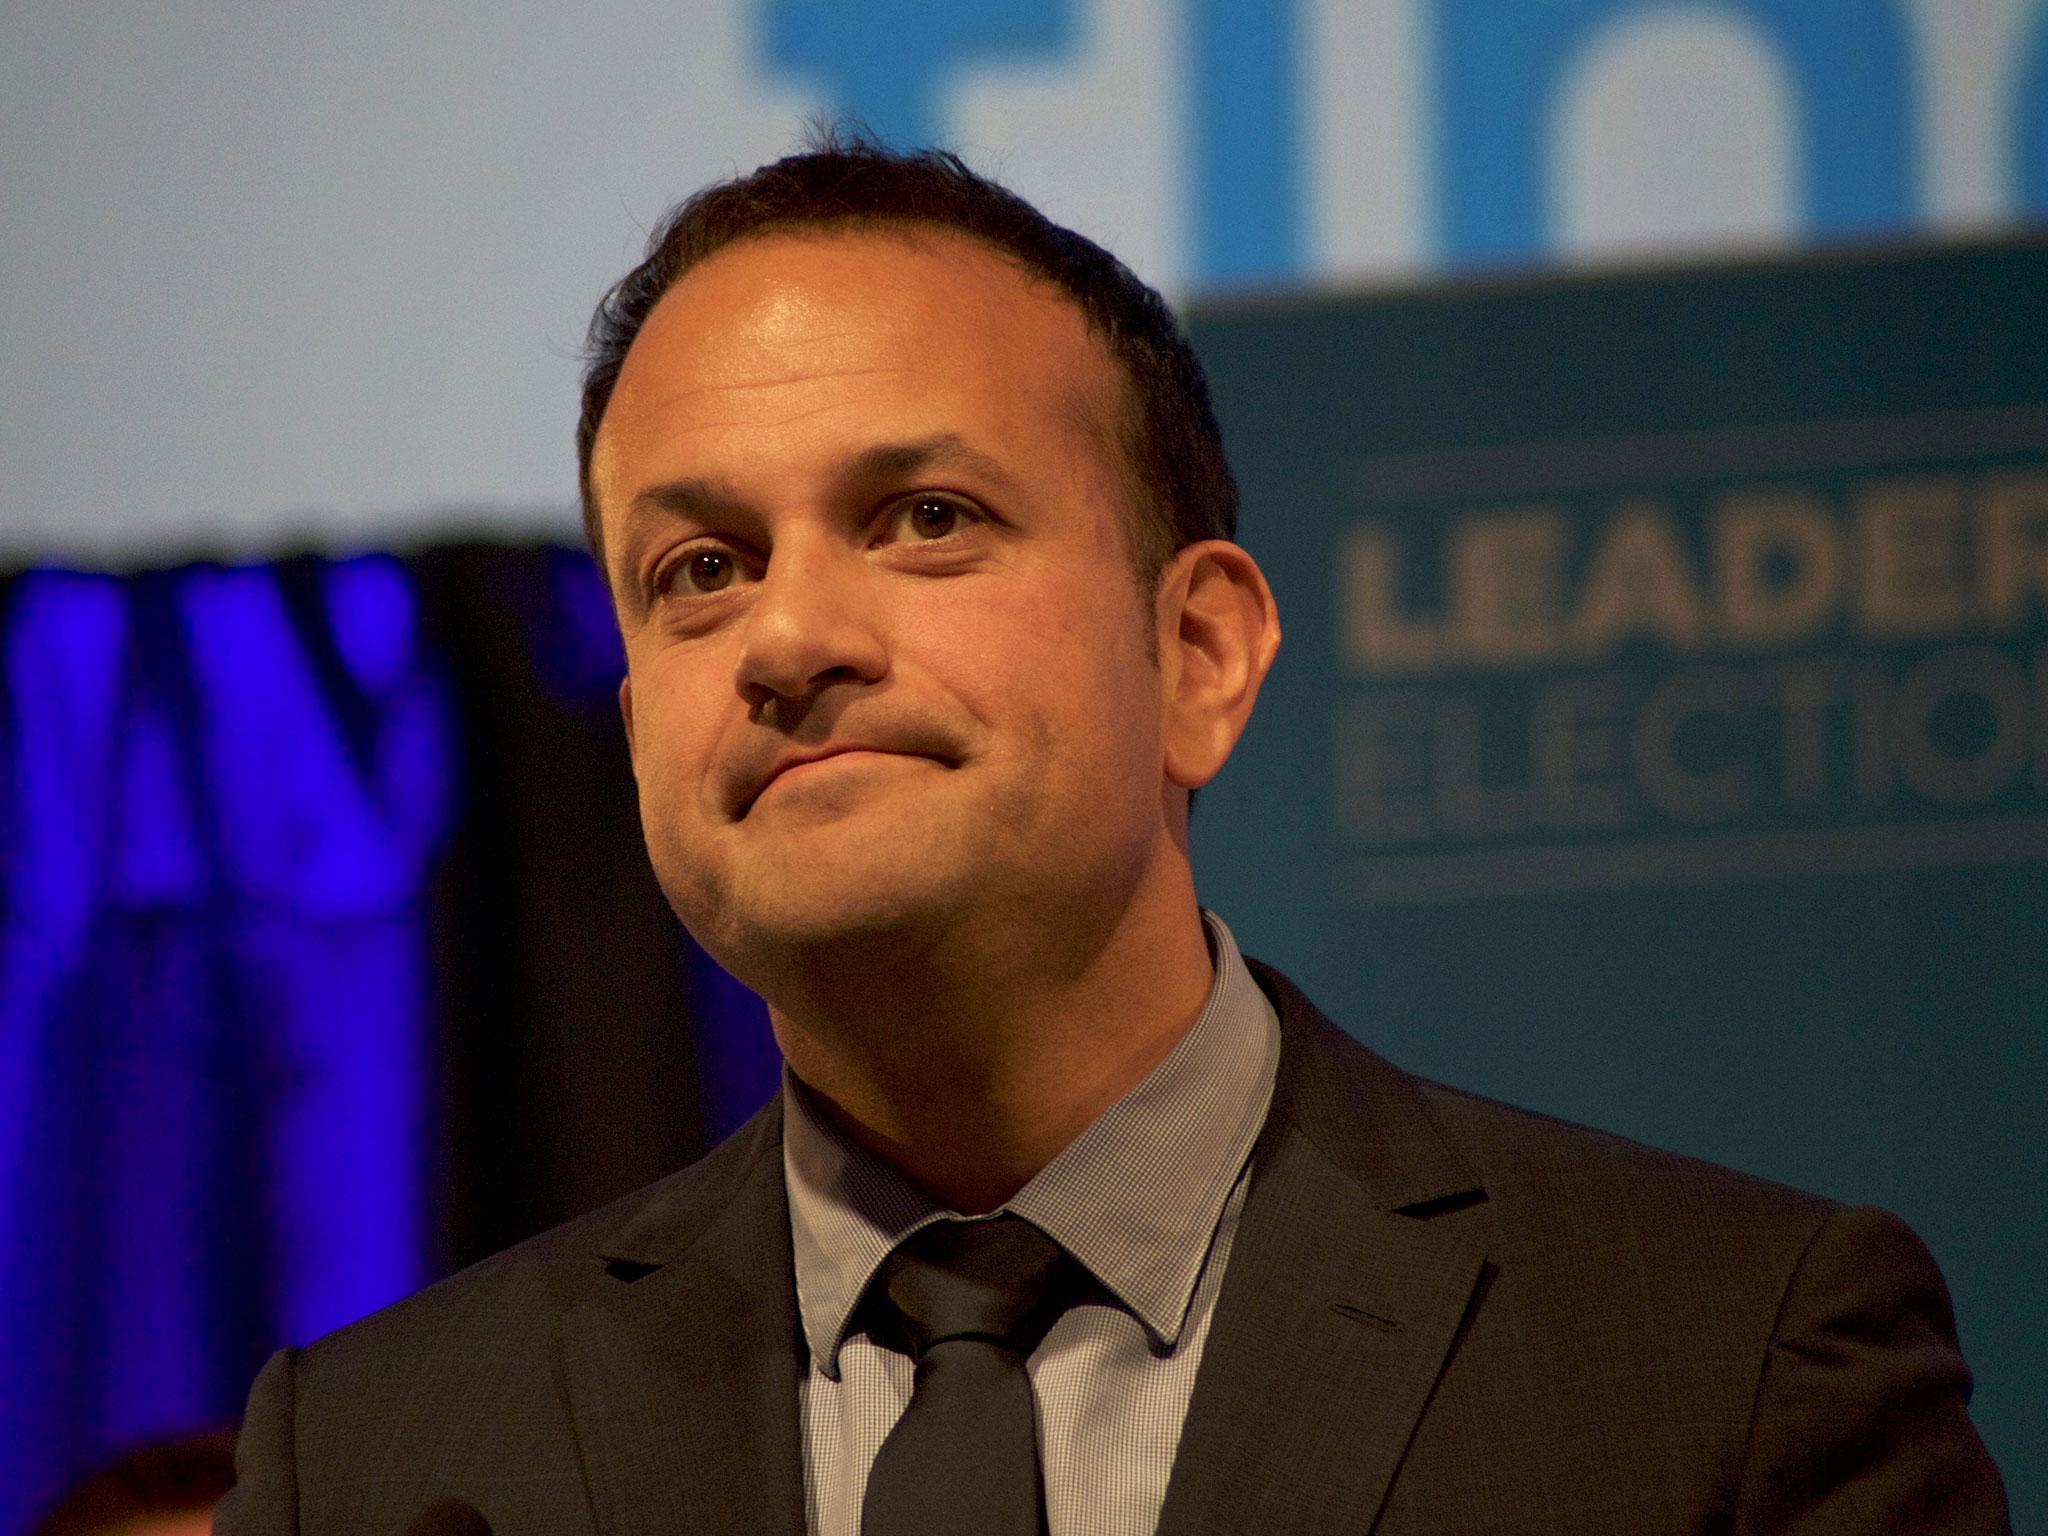 Ireland Elects First Openly Gay Prime Minister, Leo Varadkar